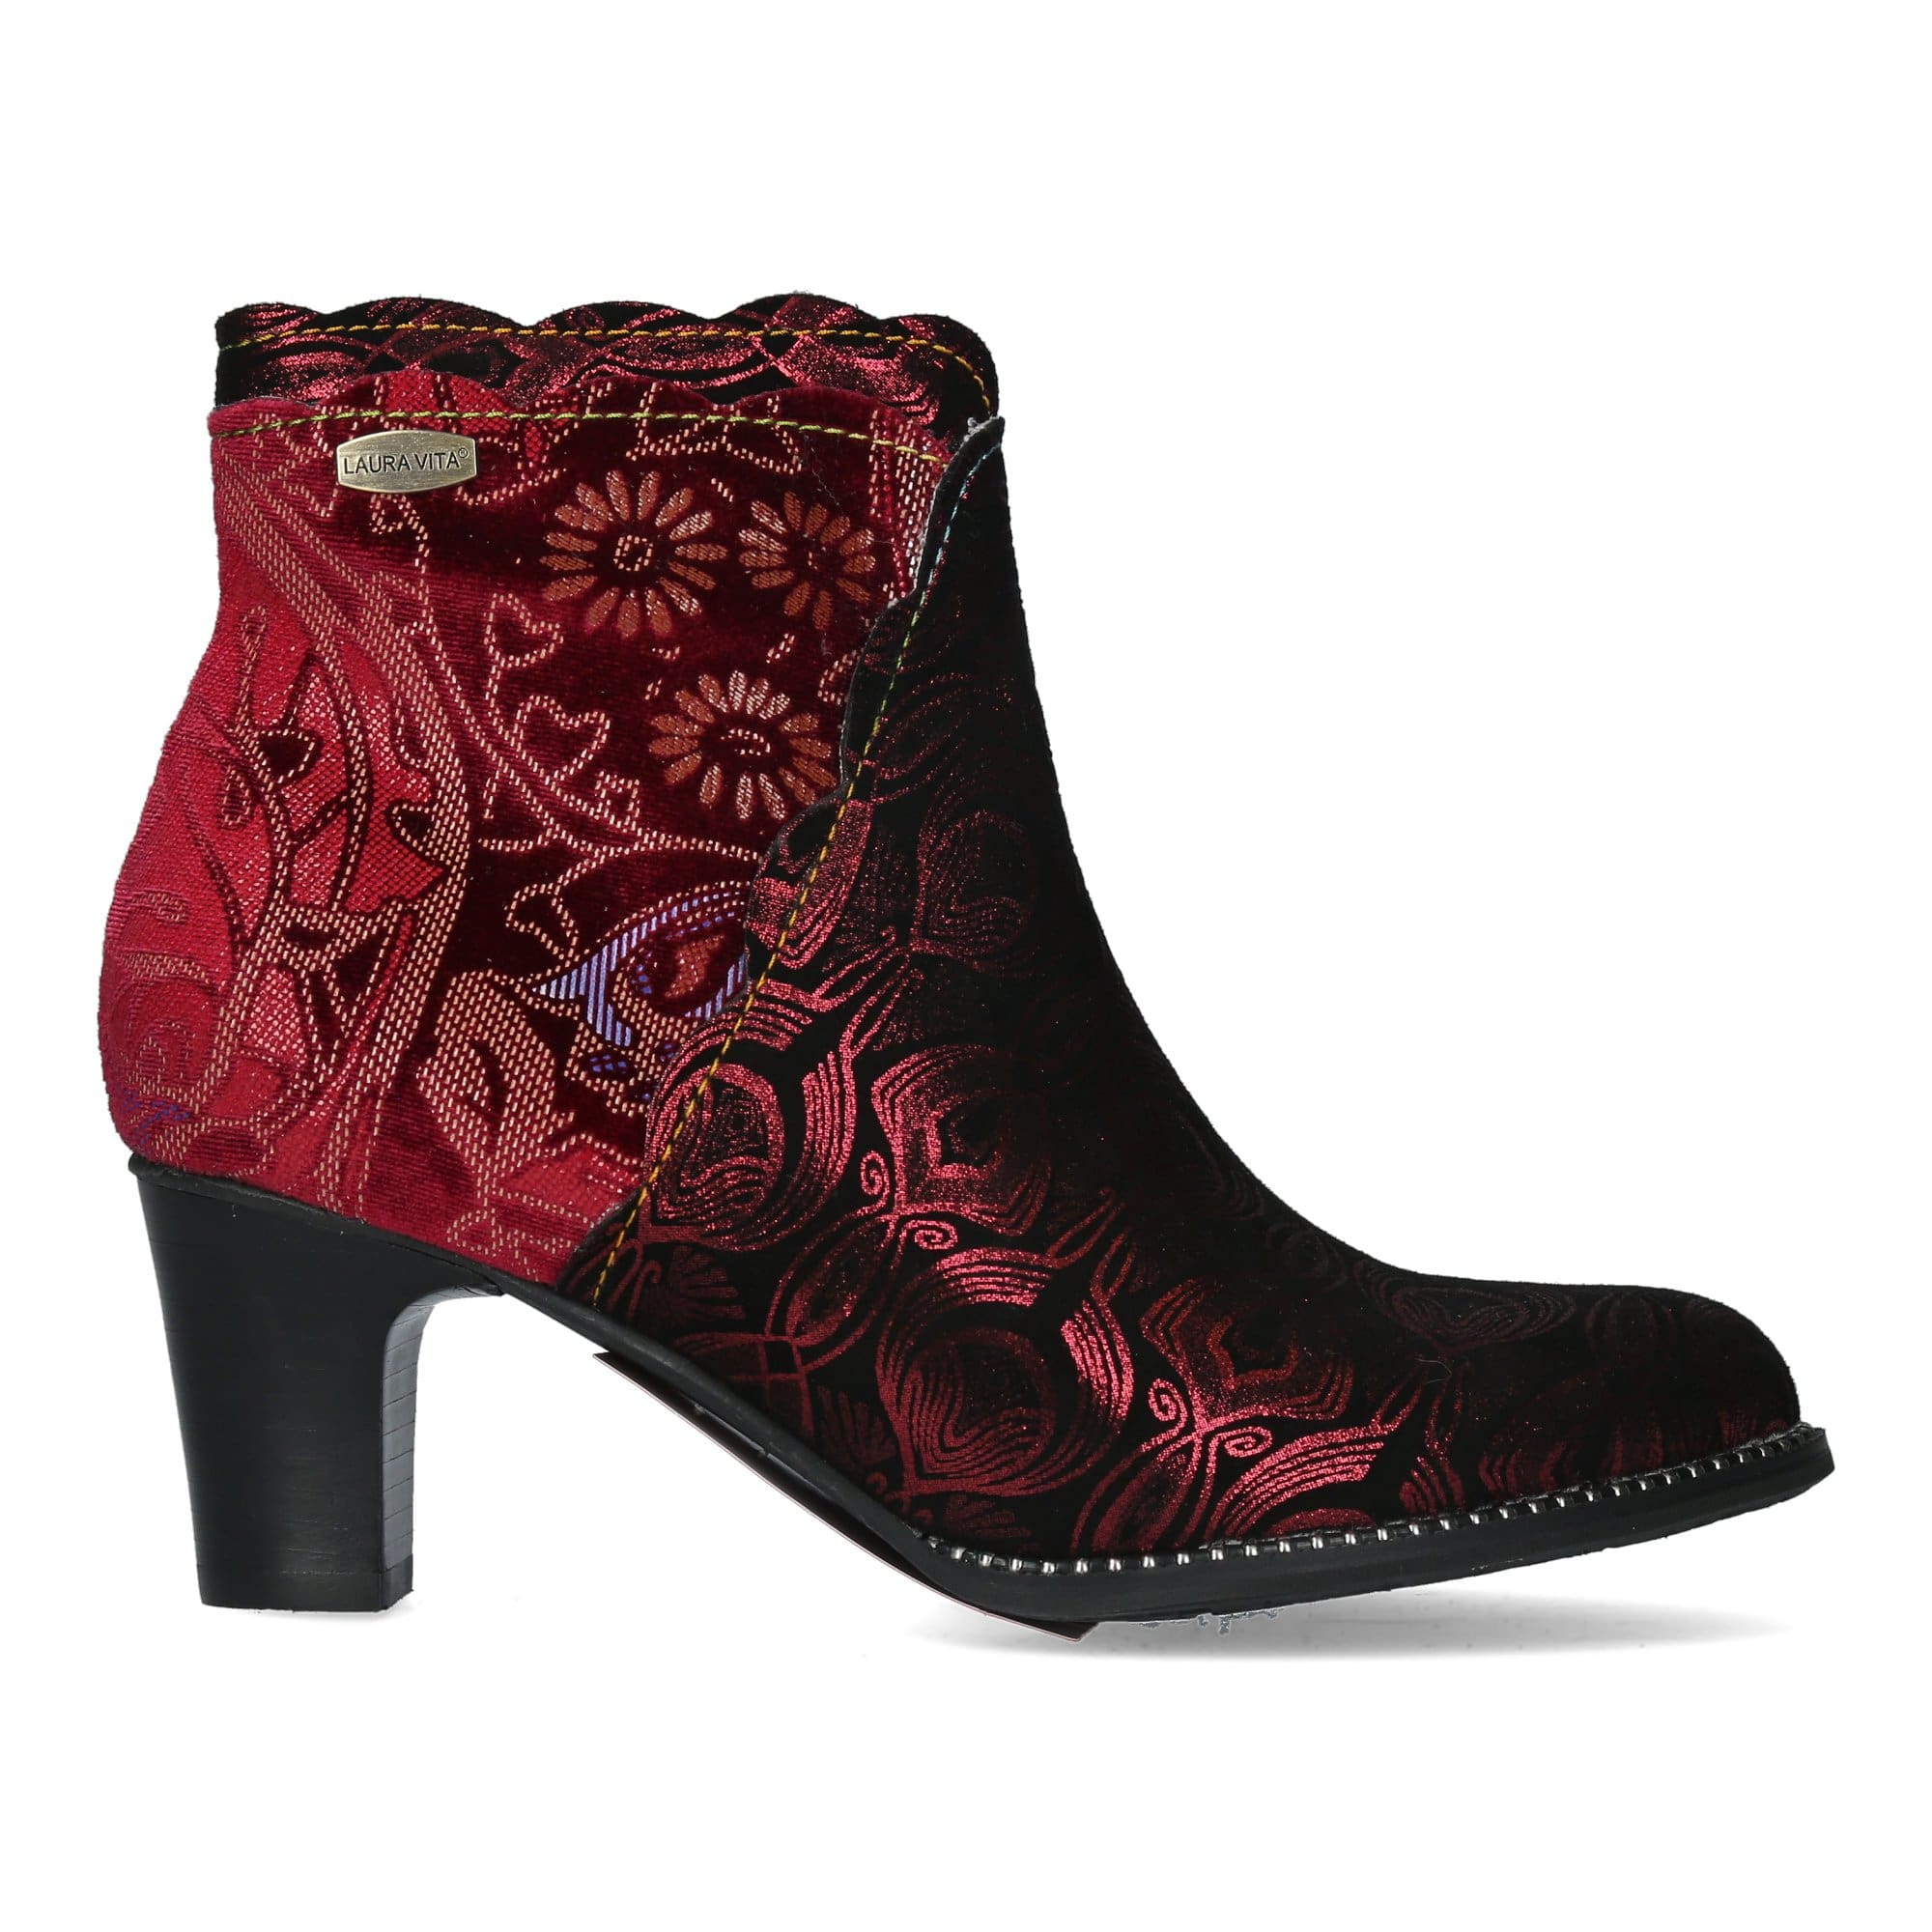 ELCODIEO 06 - 35 / Red - Boots